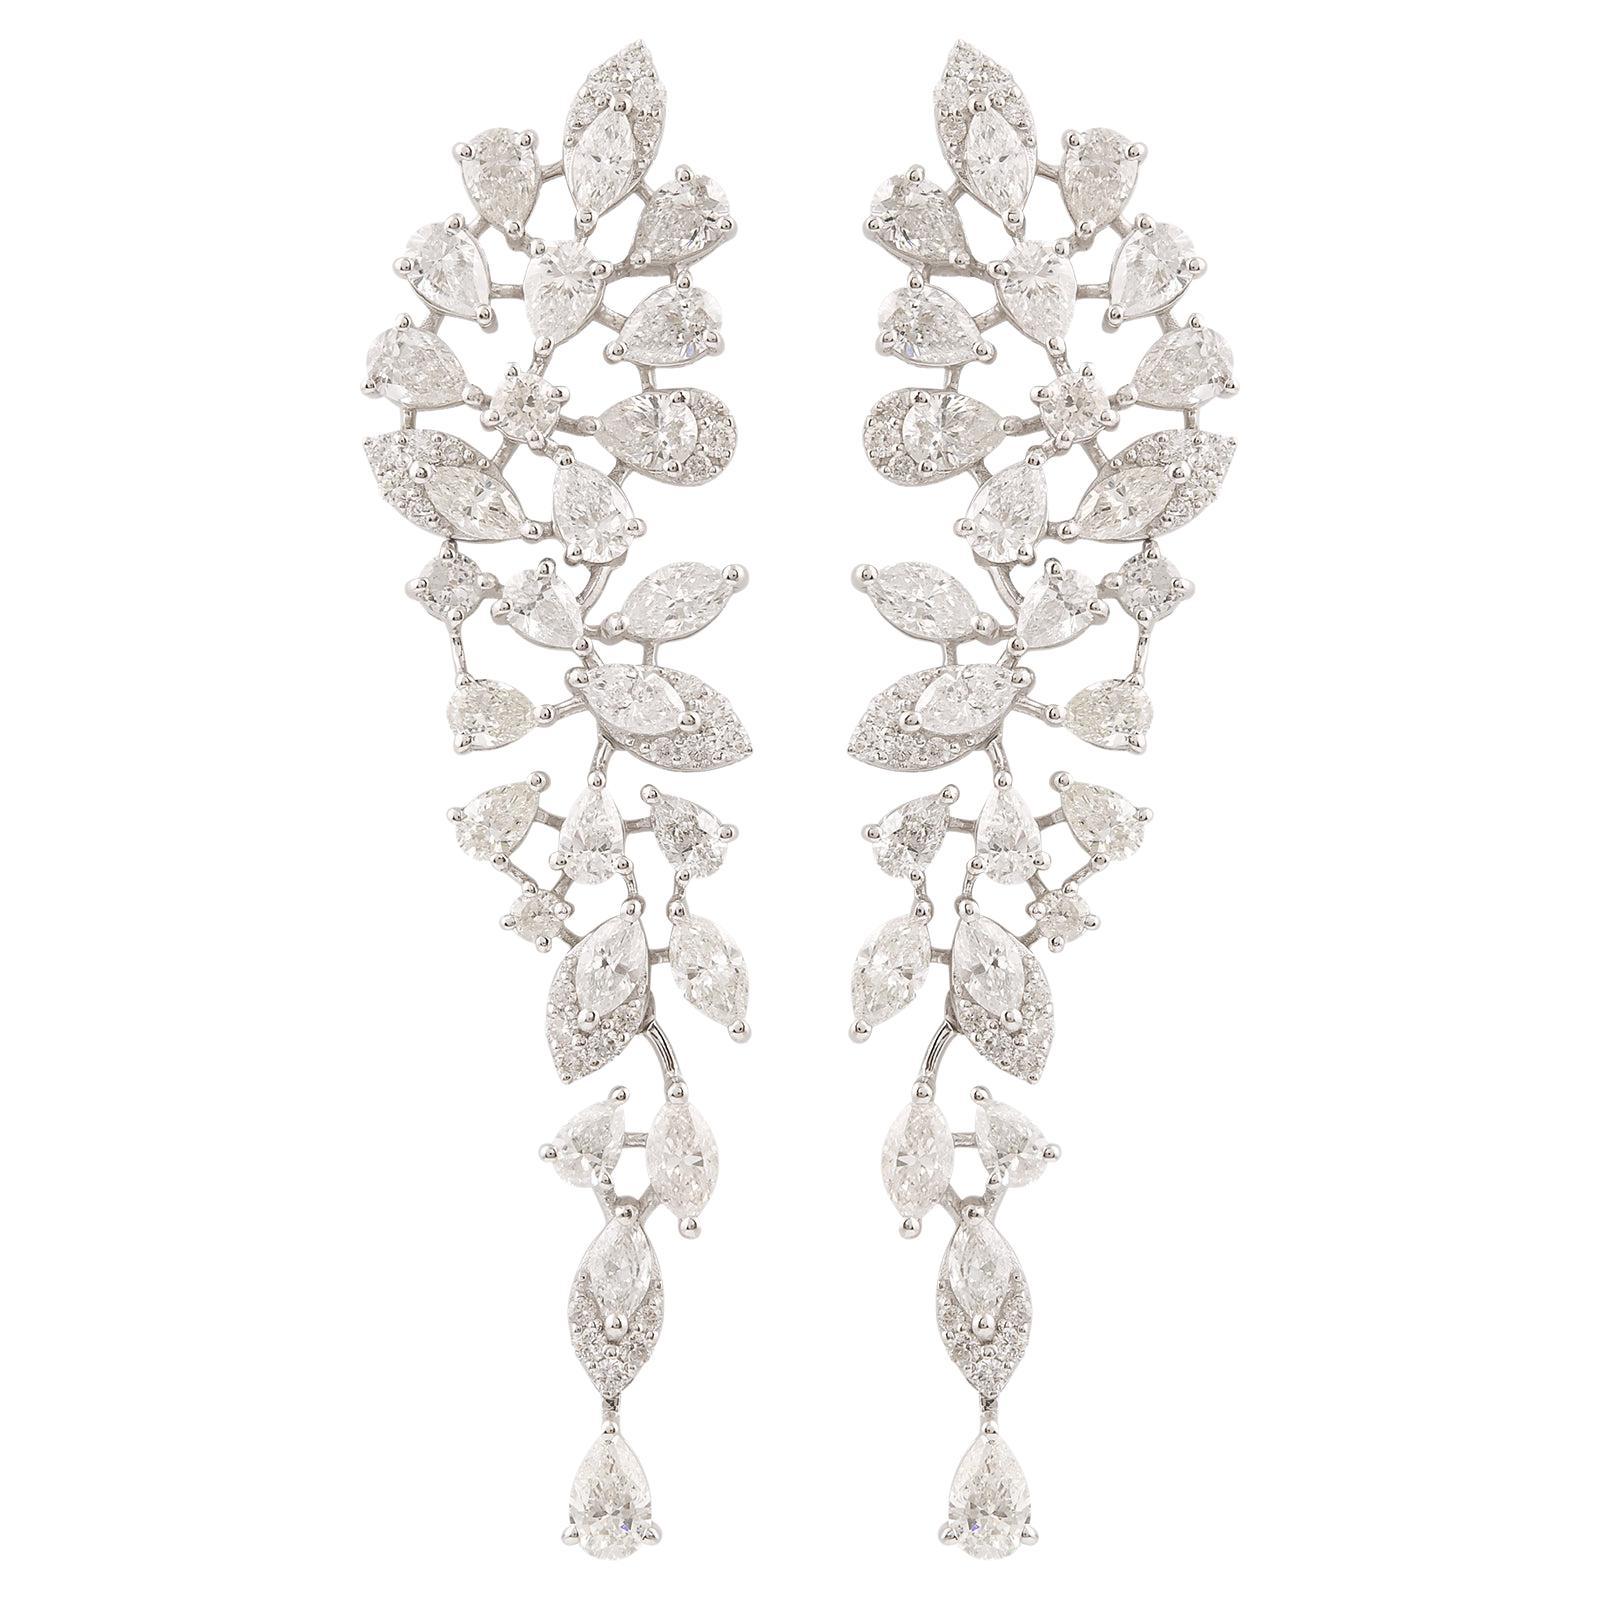 Real SI Clarity HI Color Pear Marquise Diamond Long Earrings 18 Karat White Gold For Sale